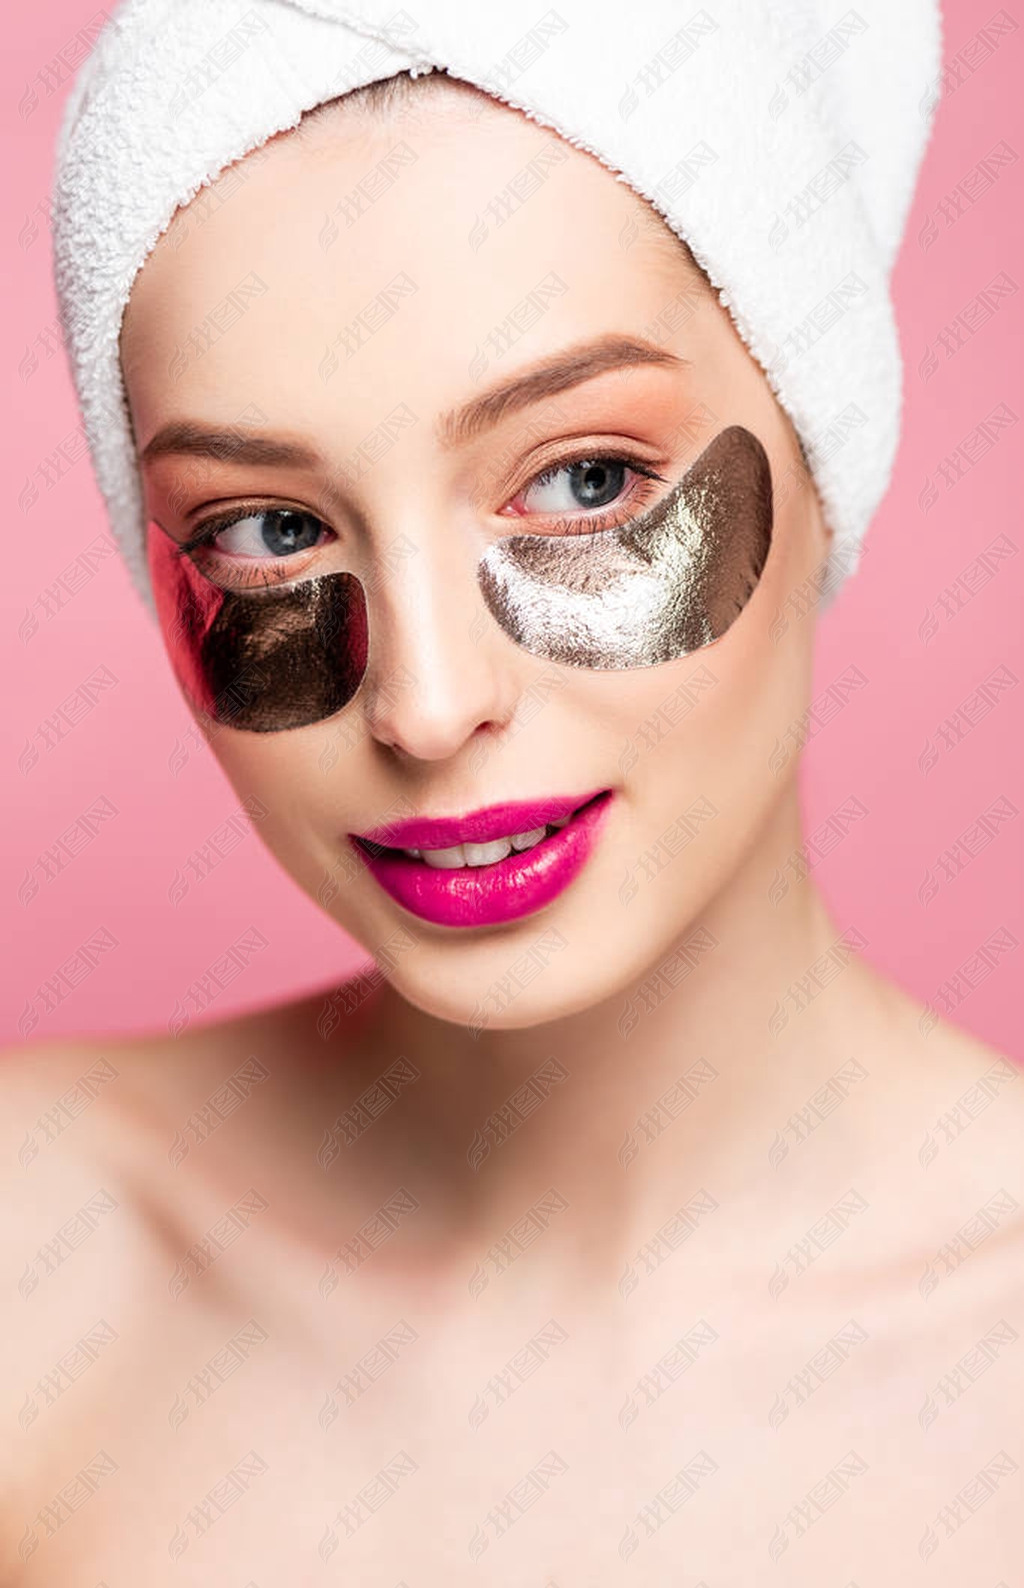 beautiful and naked woman in eye patches isolated on pink 